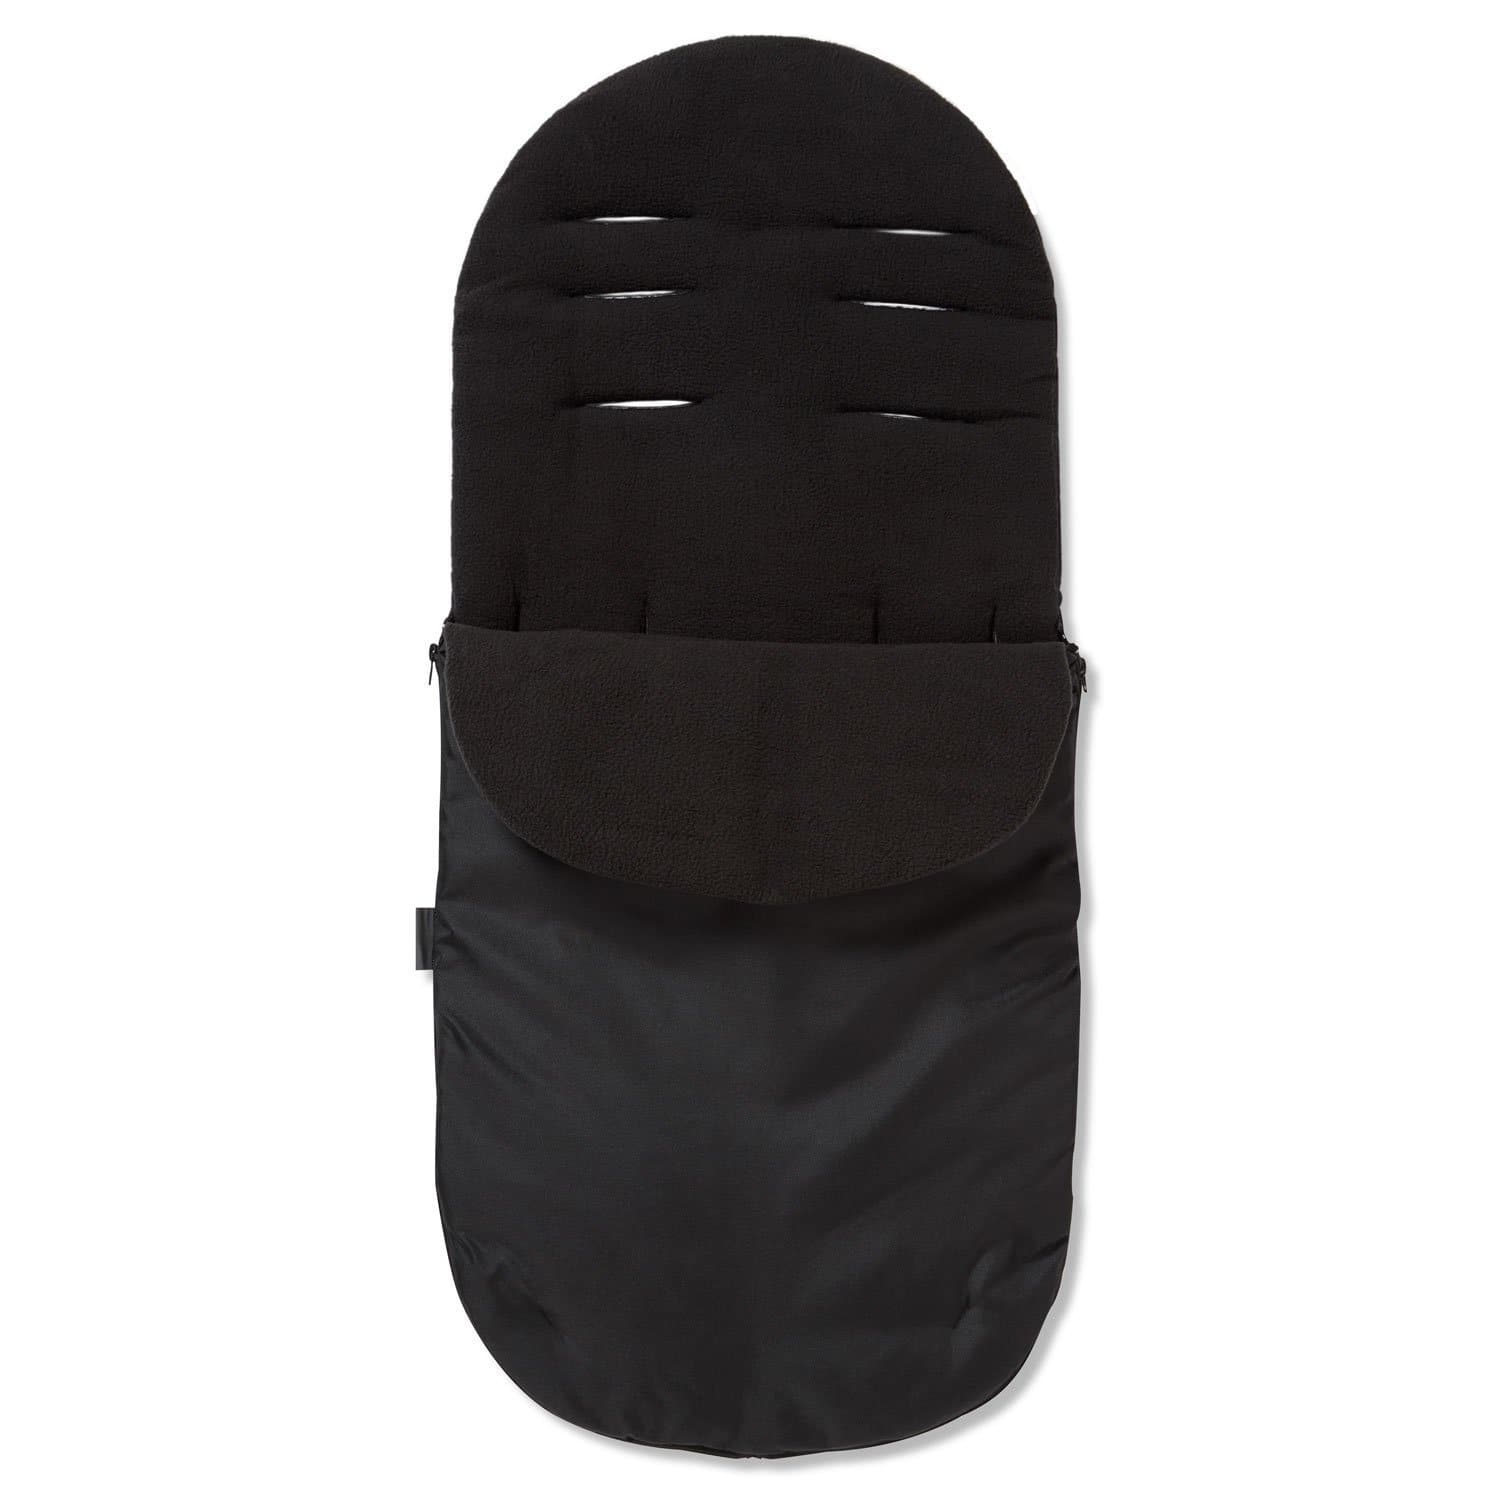 Footmuff / Cosy Toes Compatible with Unilove - Black / Fits All Models | For Your Little One